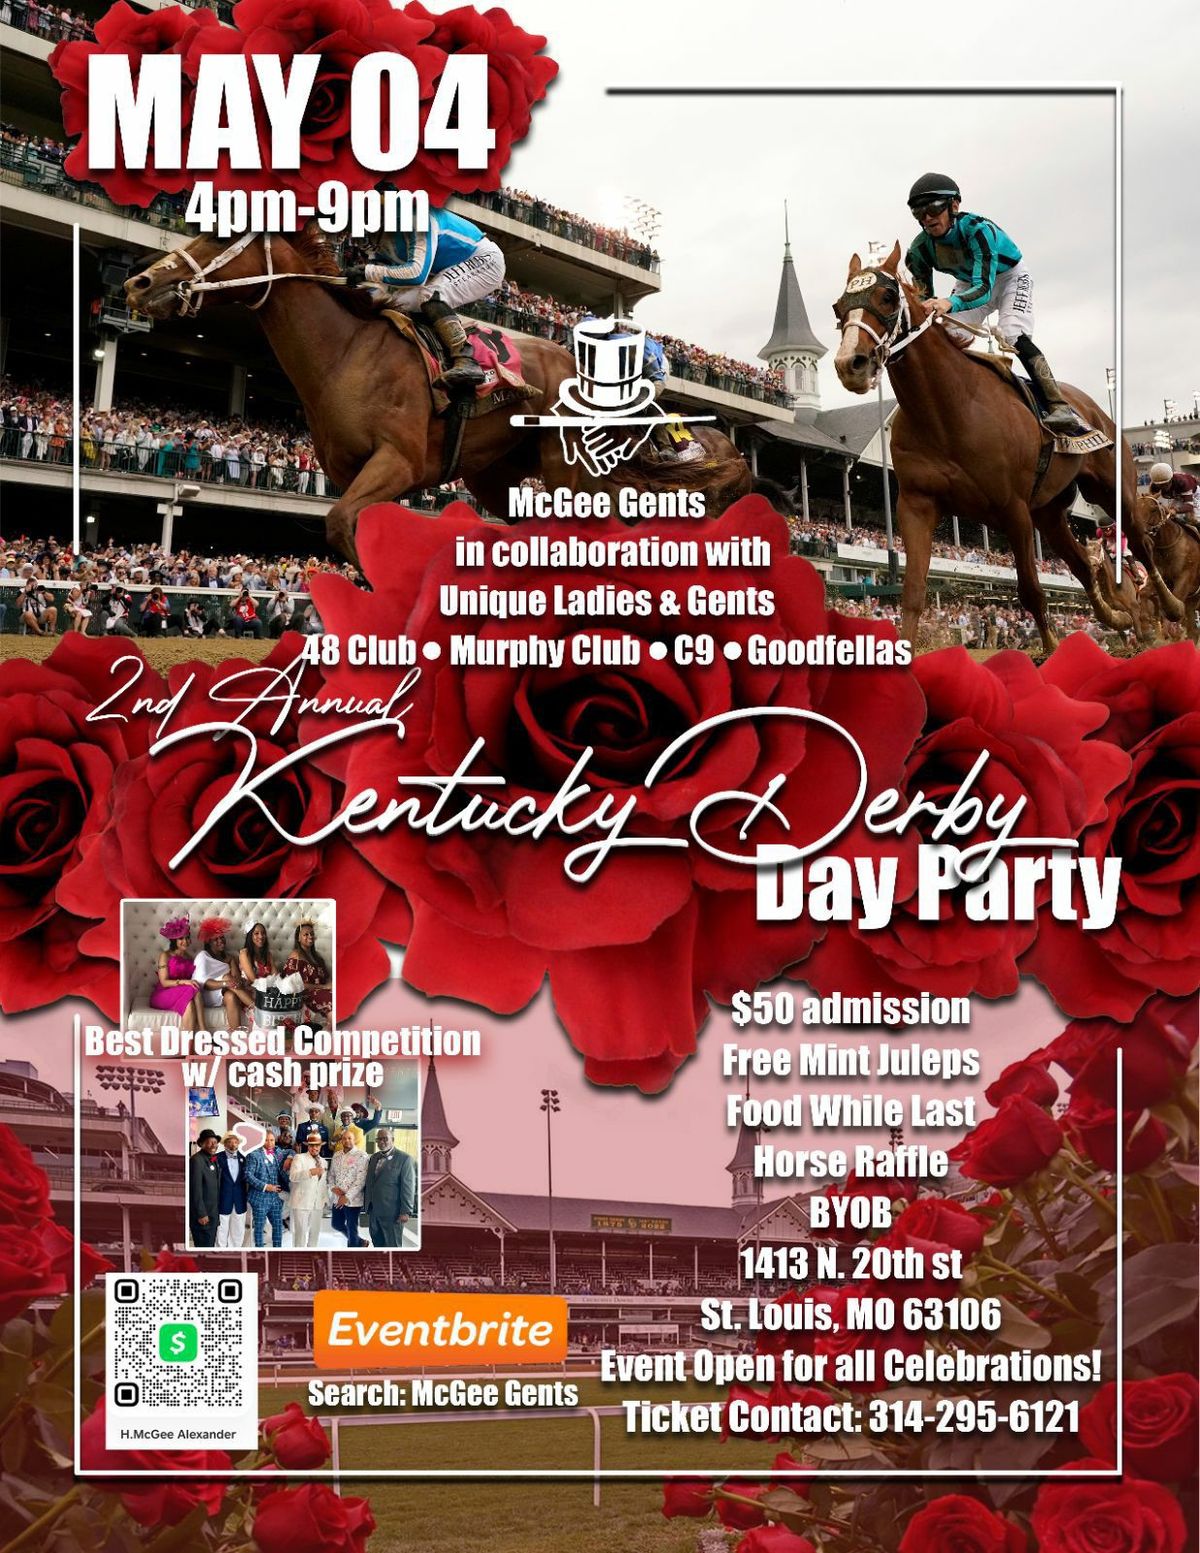 McGee Gents Annual Kentucky Derby Fundraiser